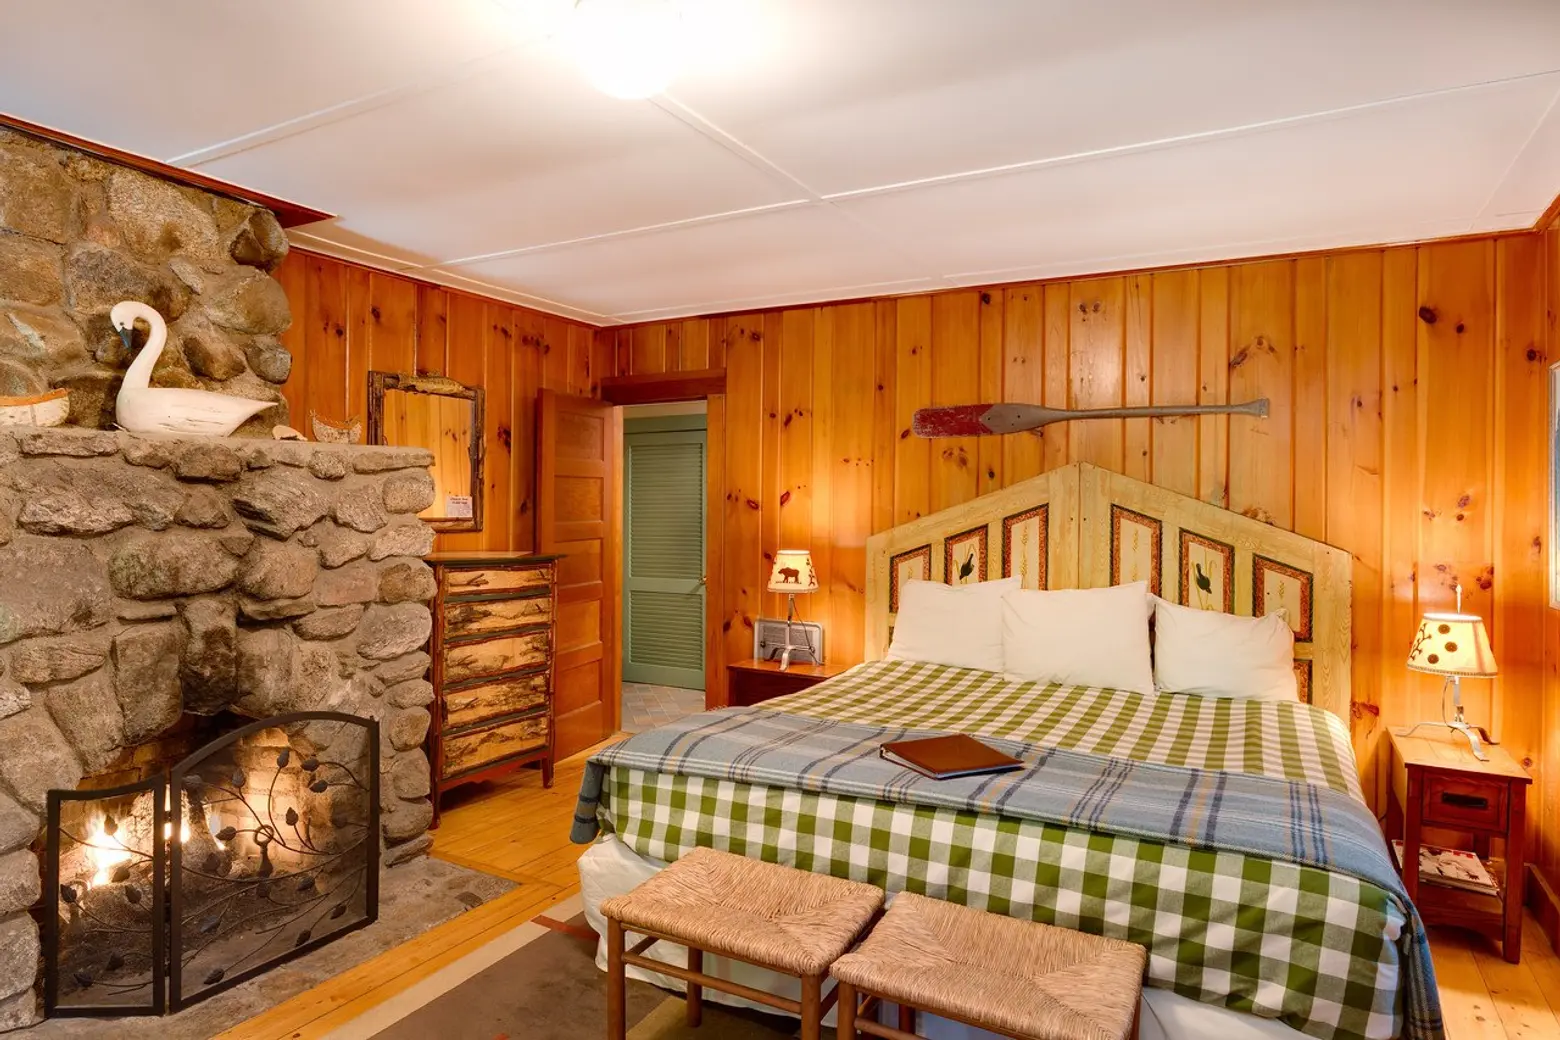 122 Hedges Road, Blue Mountain Lake NY, The Hedges of Blue Mountain Lake, Adirondacks camps, Adirondacks real estate